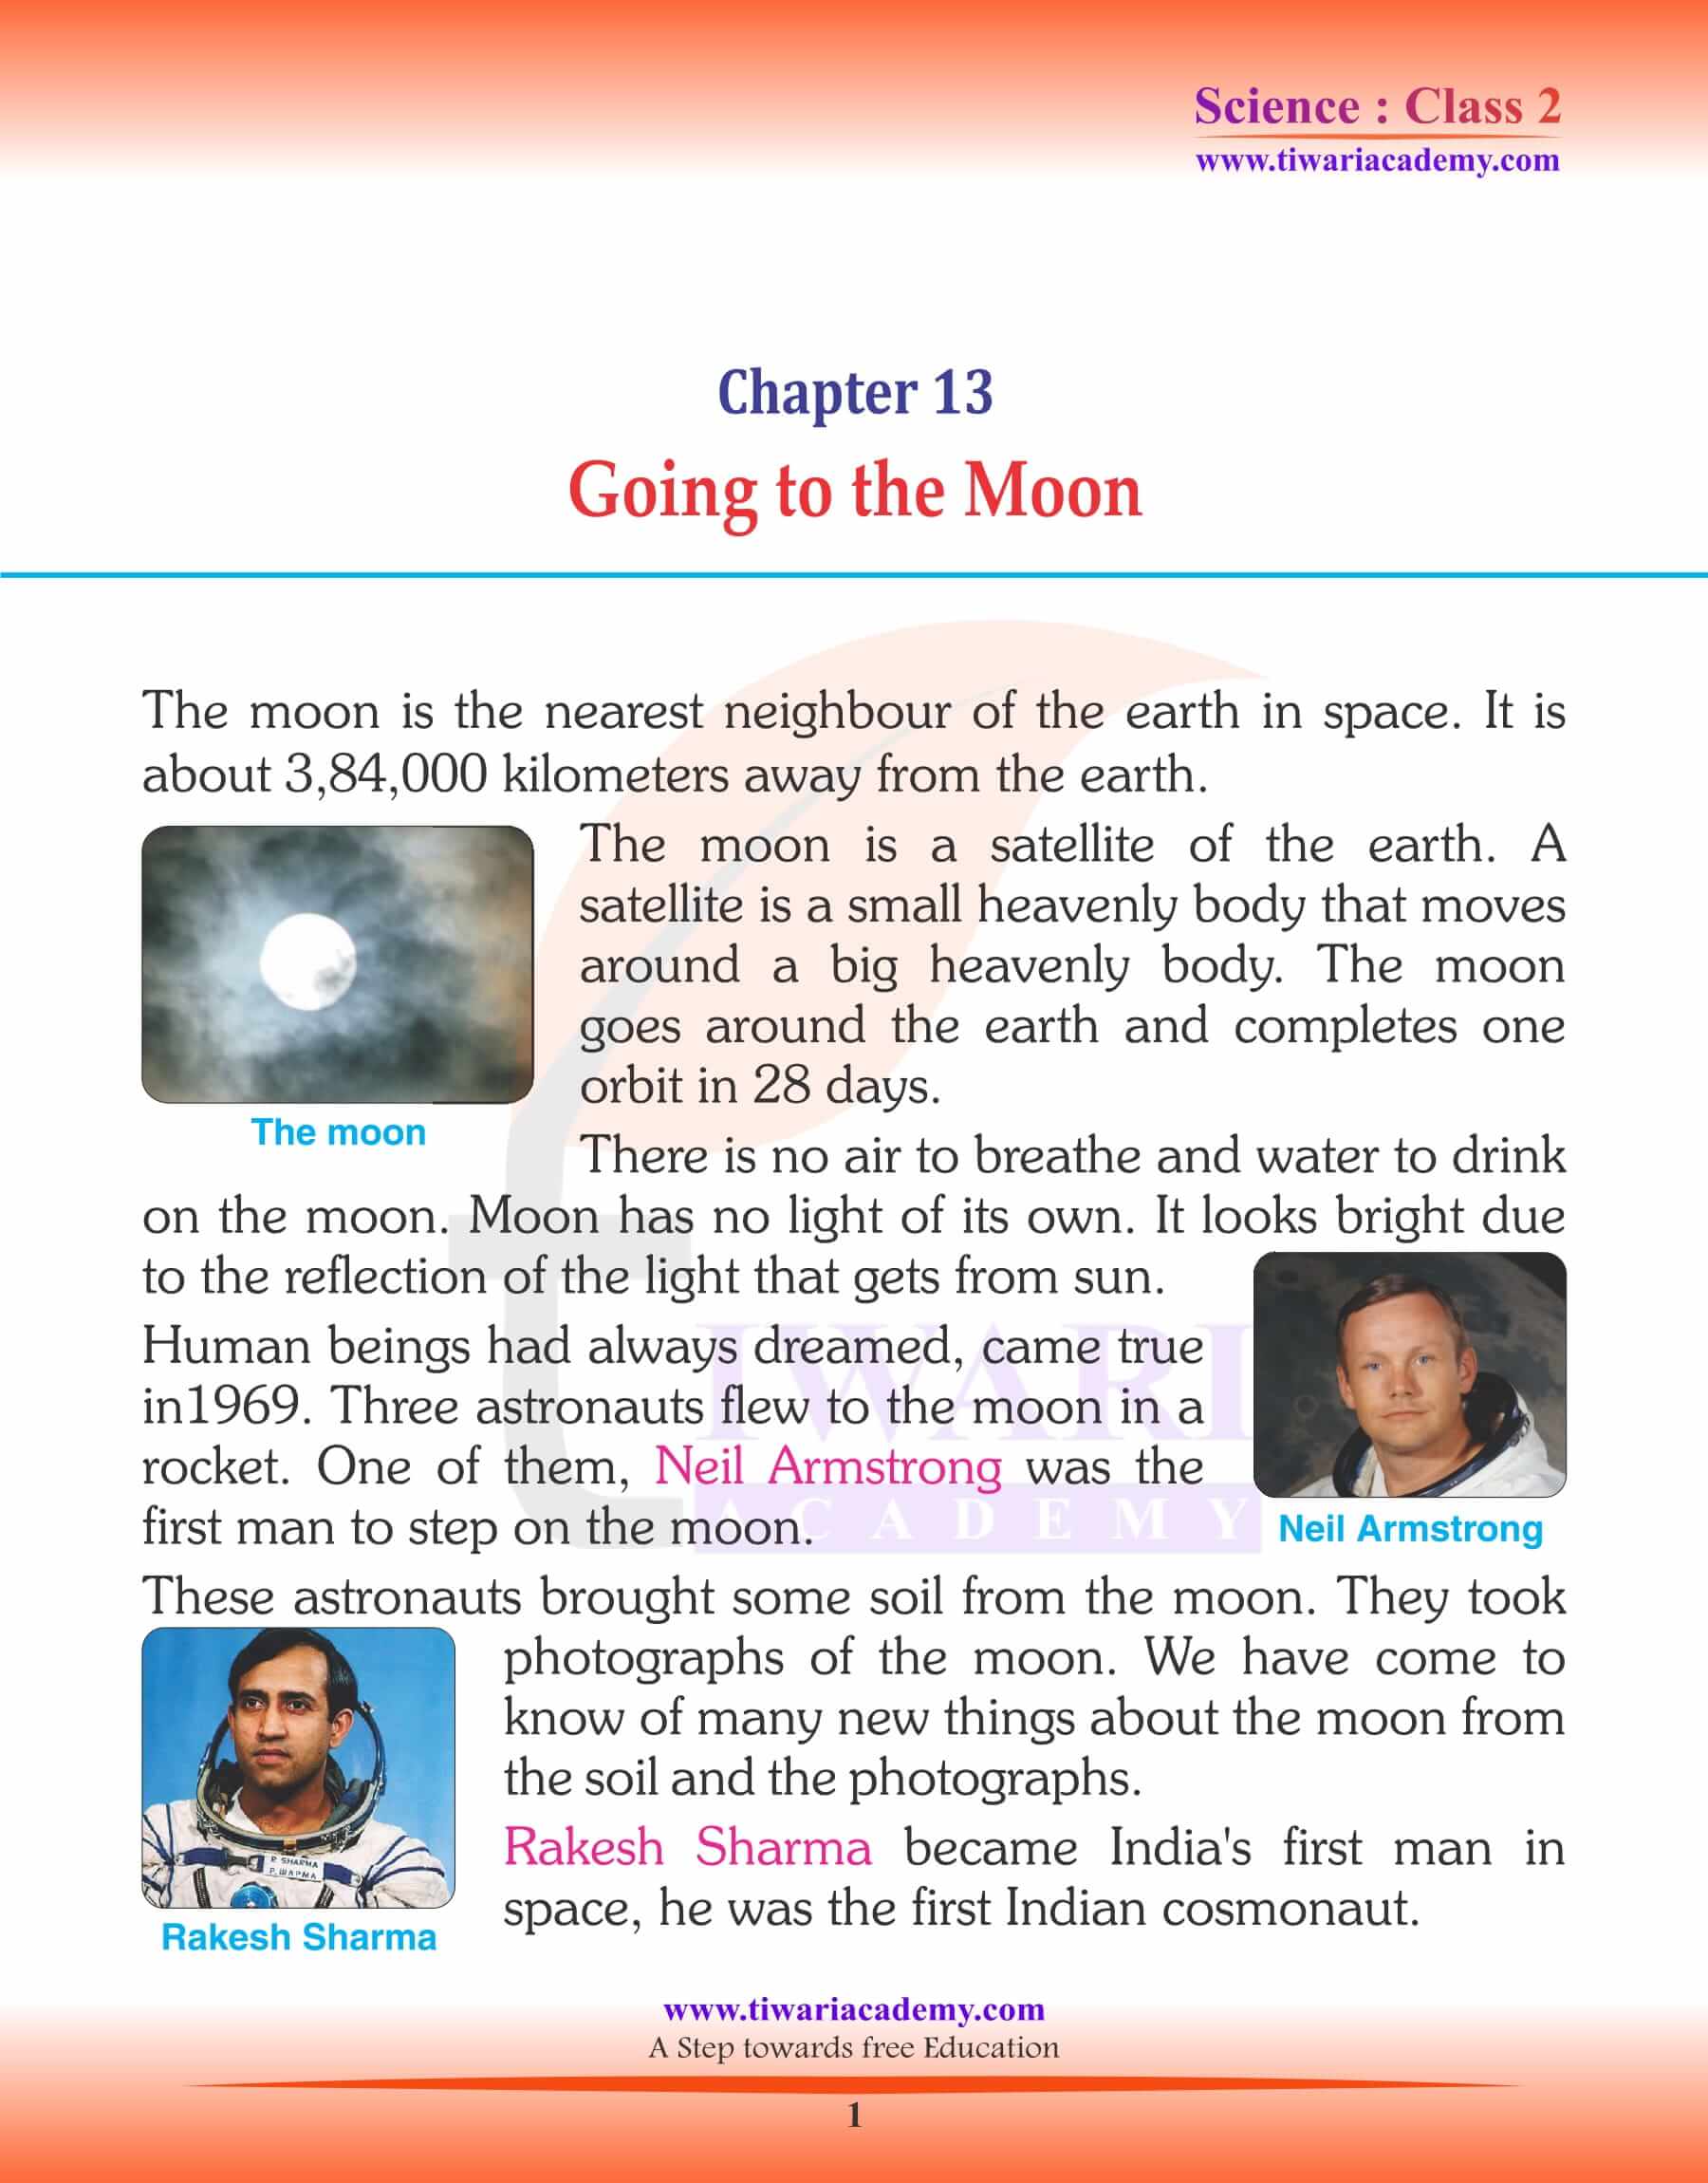 NCERT Solutions for Class 2 Science Chapter 13 Going to the Moon